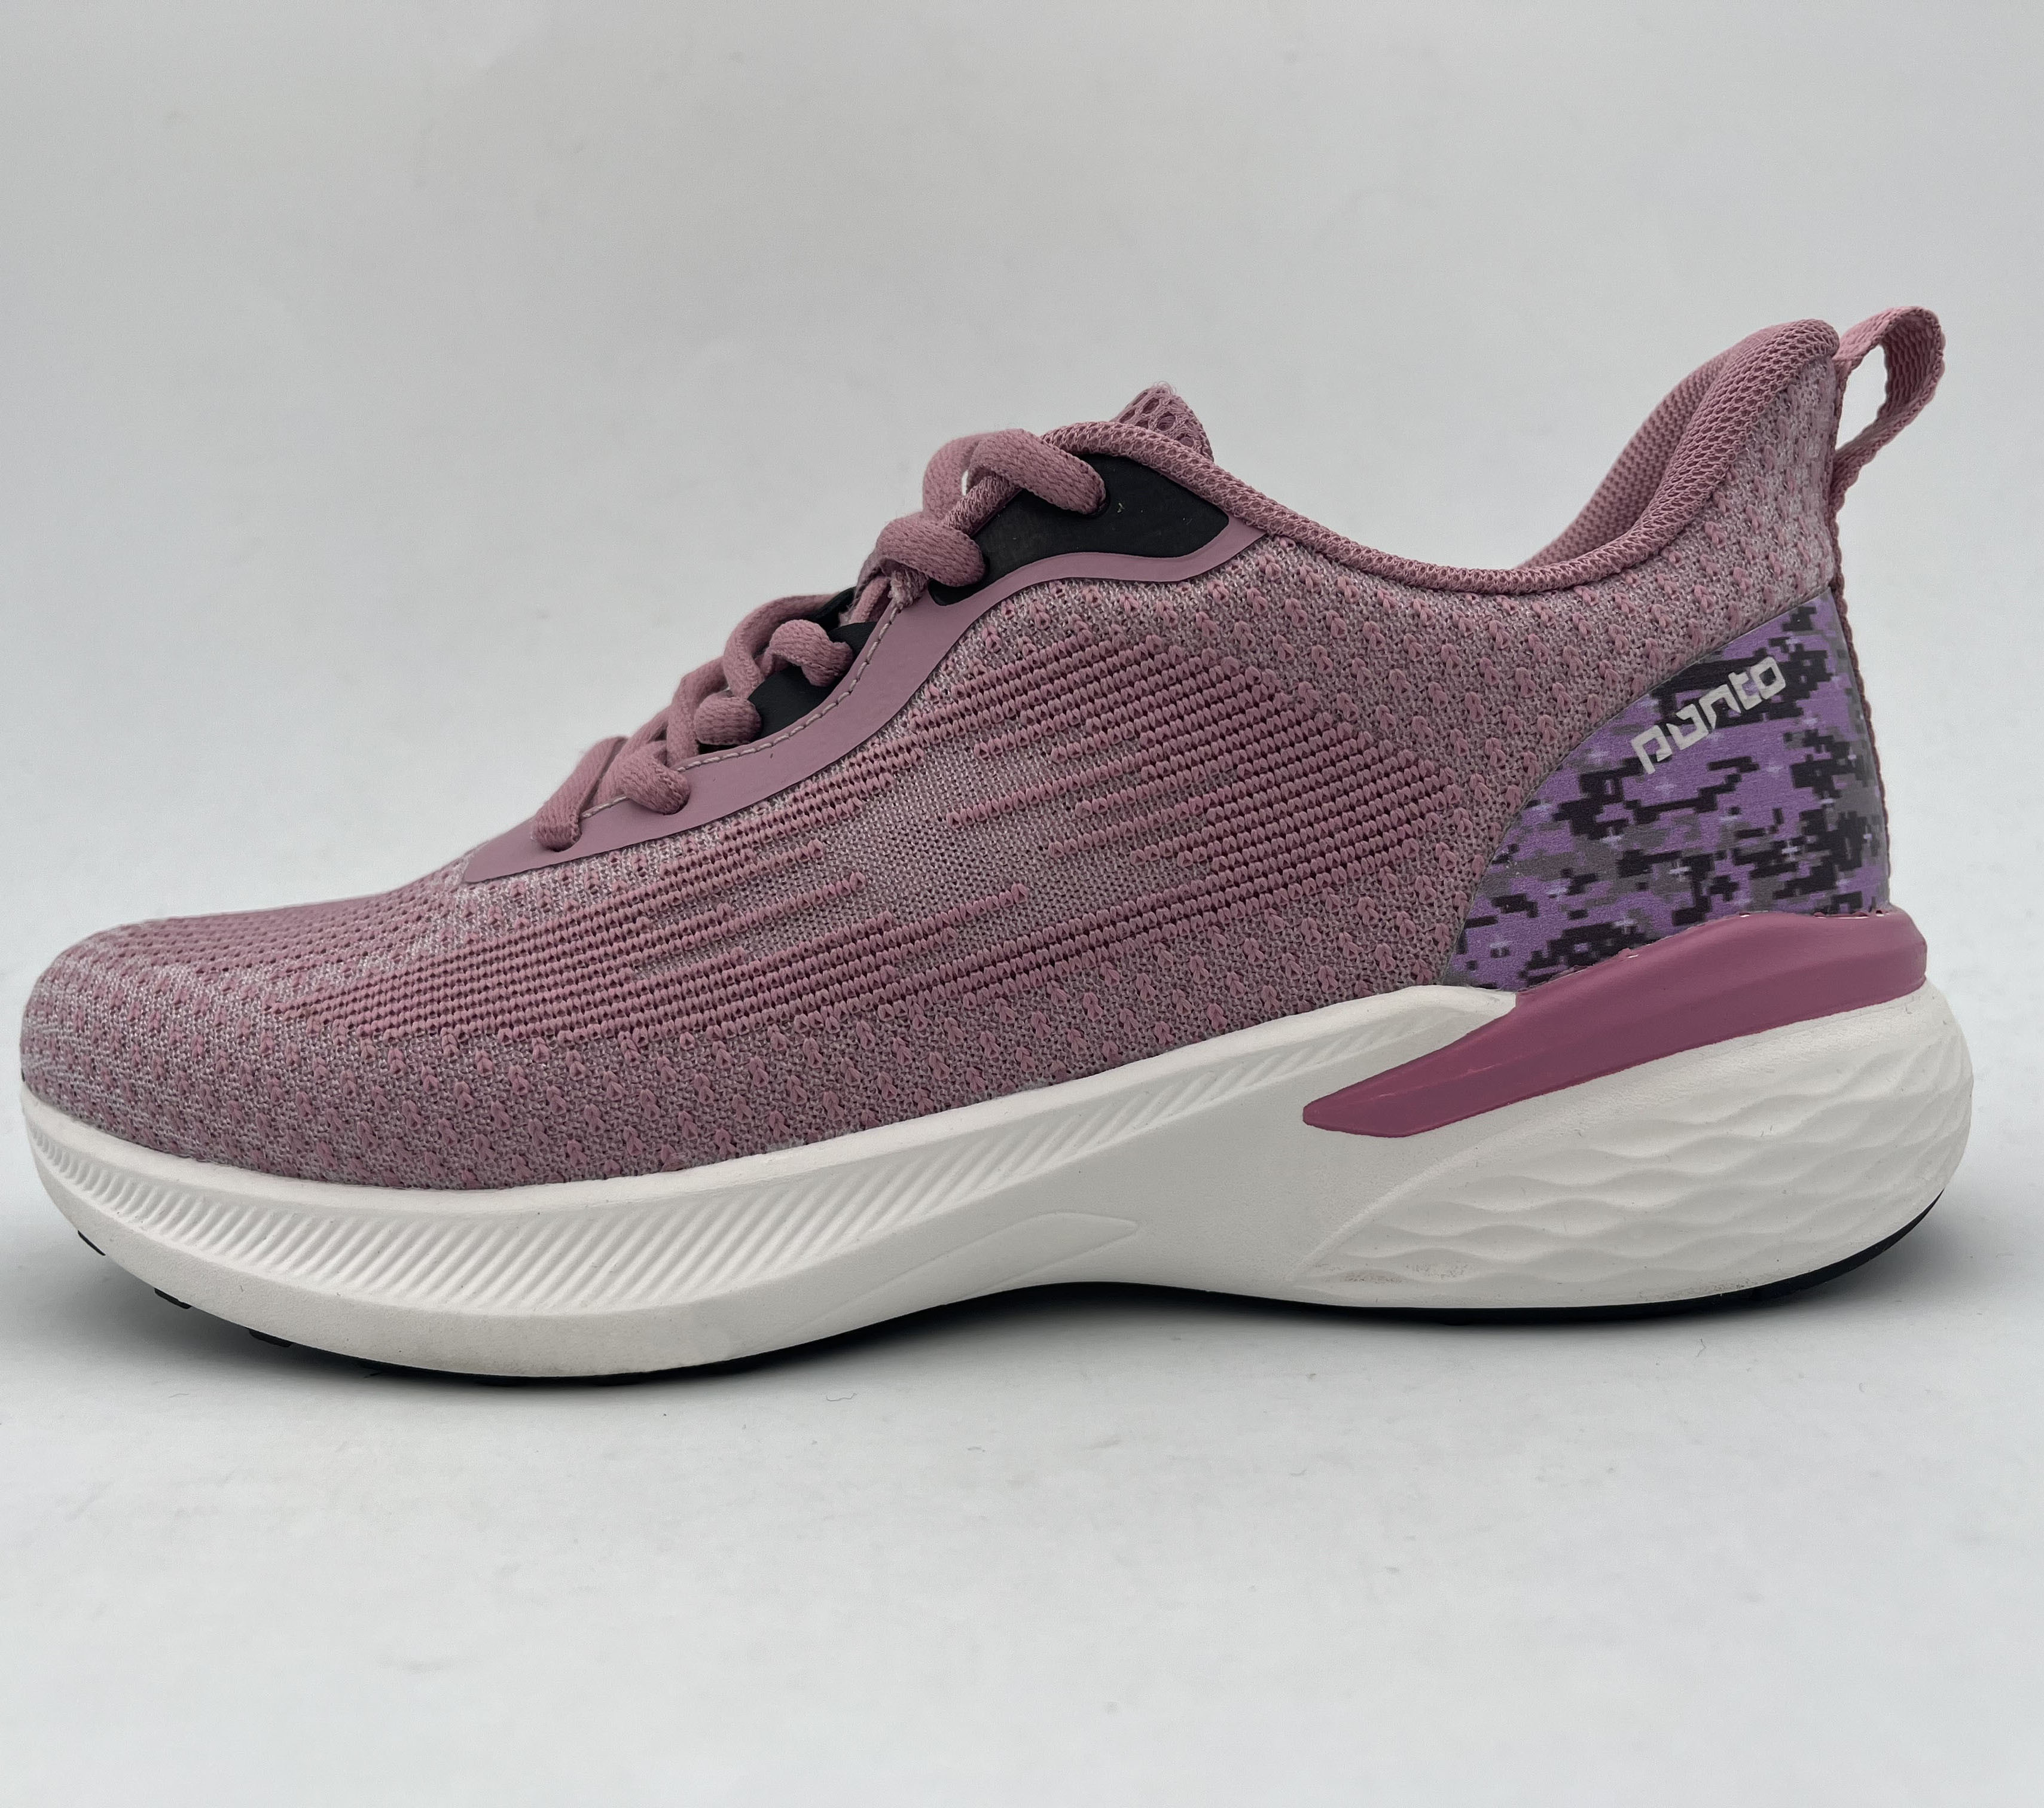 S22007 breathable mesh upper material soft elastic band sport shoes